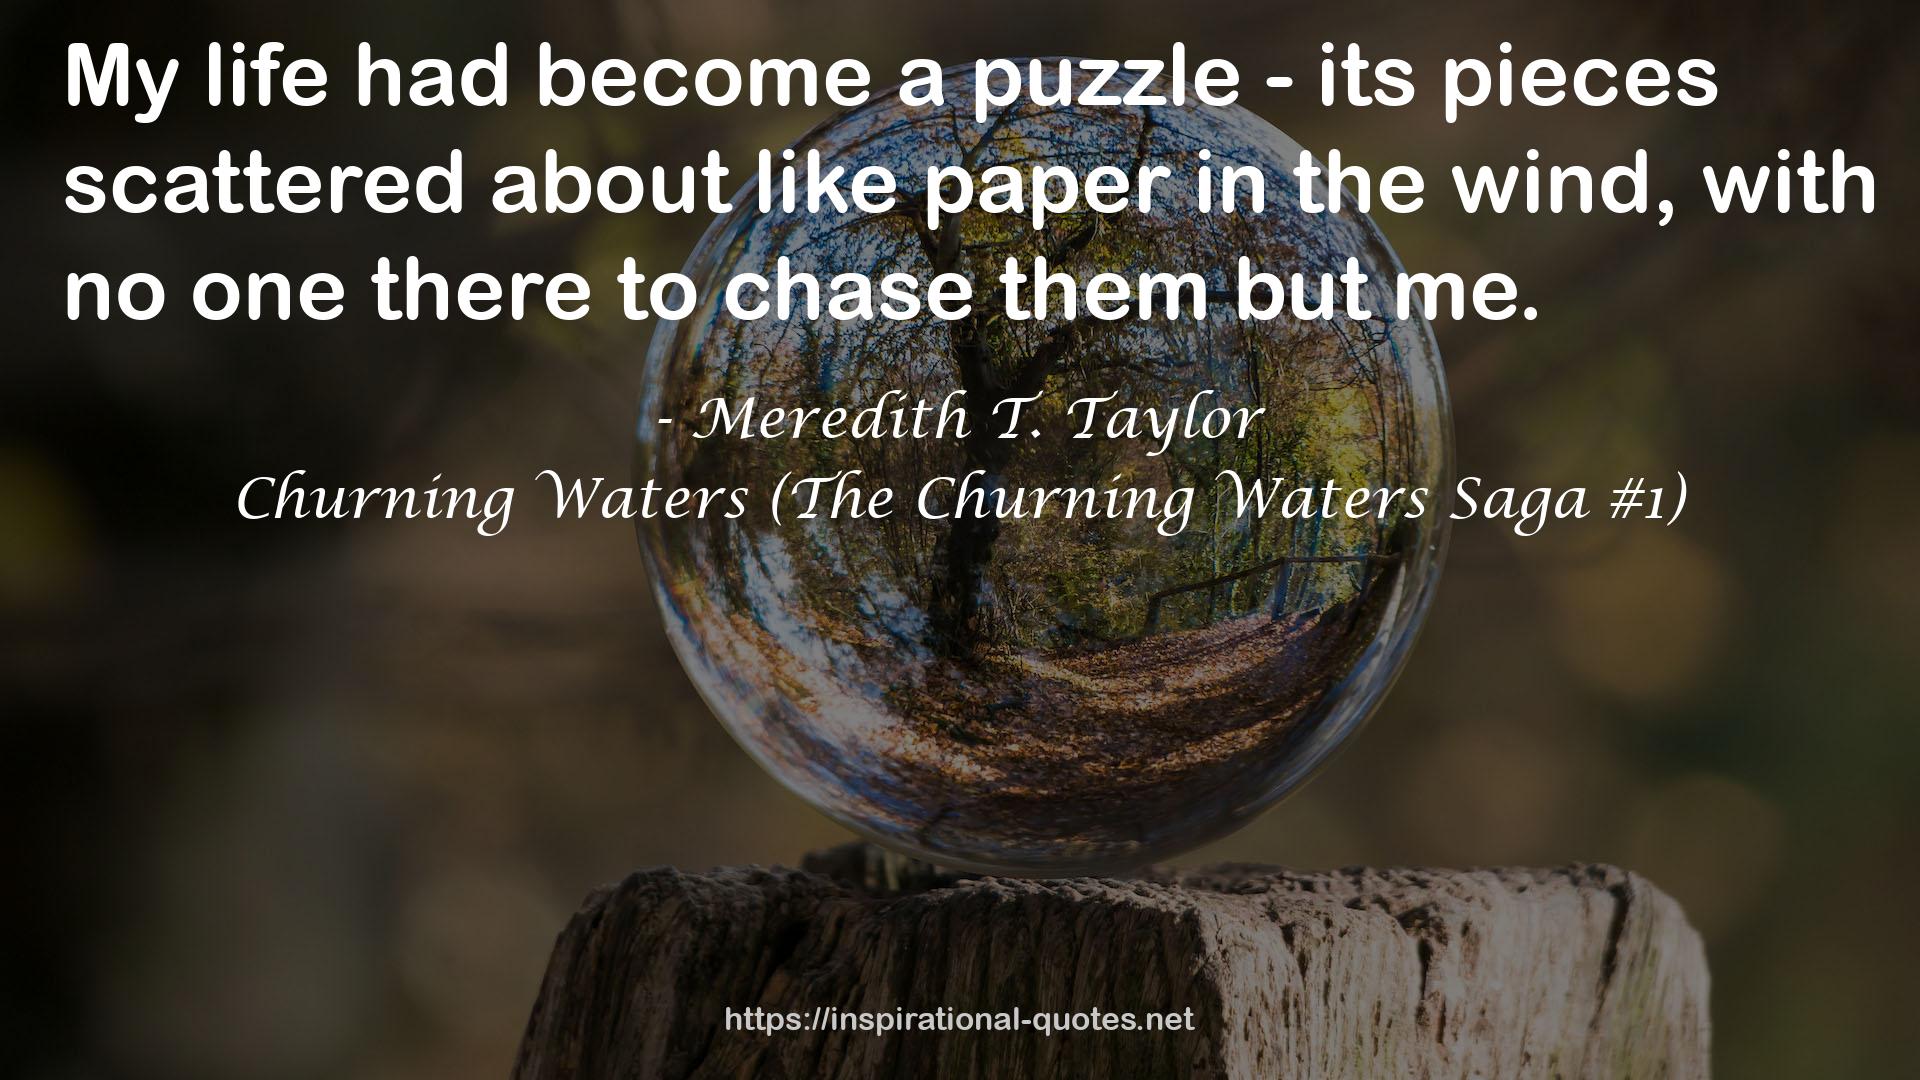 Churning Waters (The Churning Waters Saga #1) QUOTES